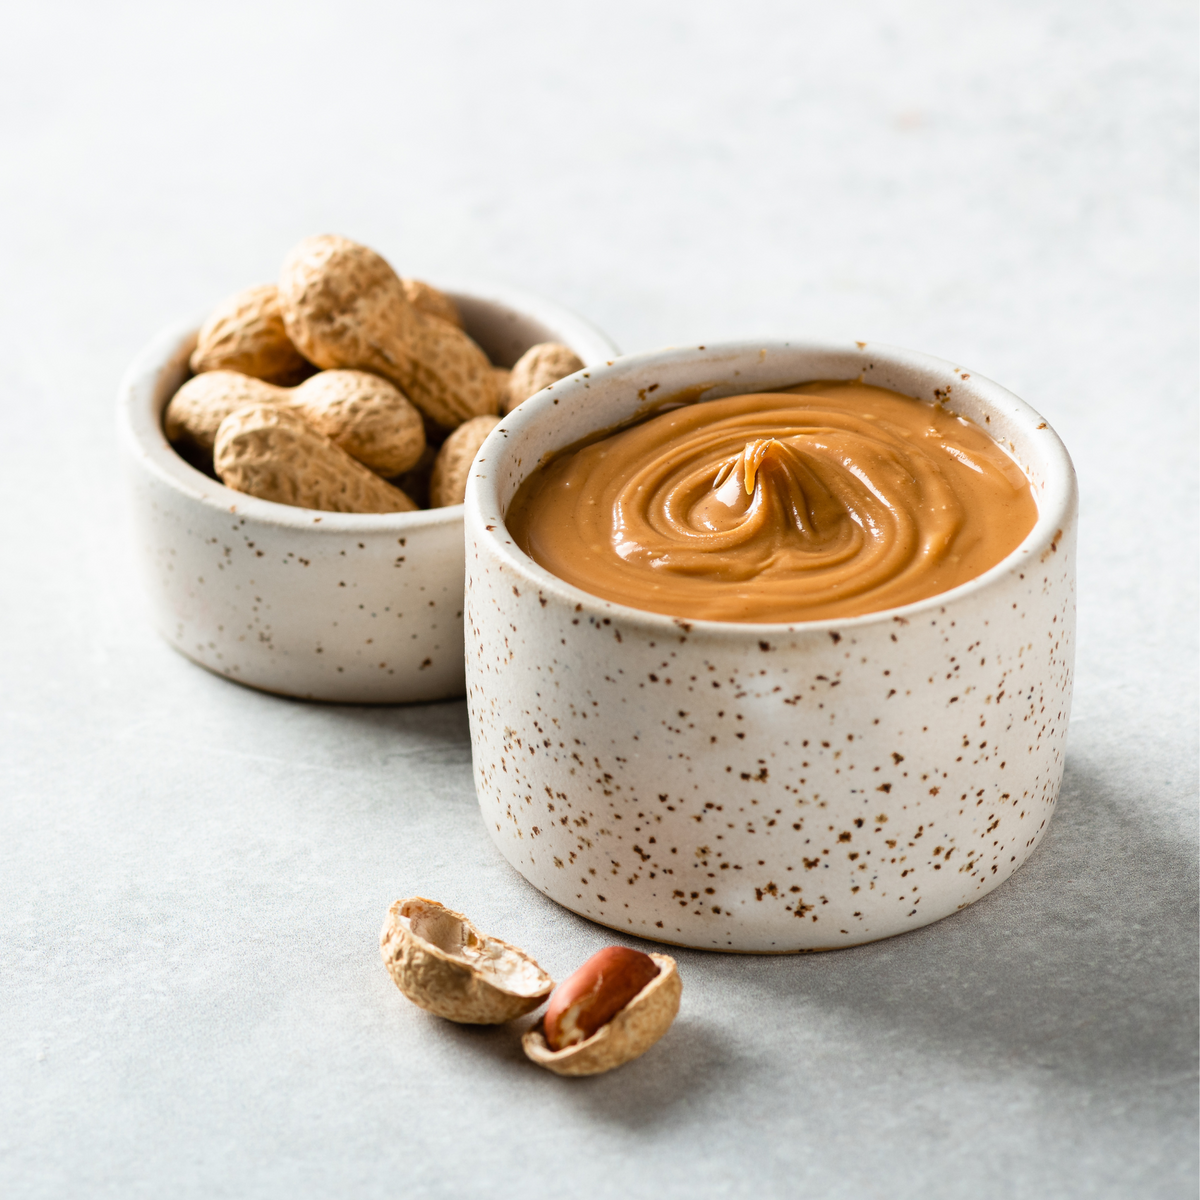 Is It OK to Eat Peanut Butter When I Have Diarrhea?